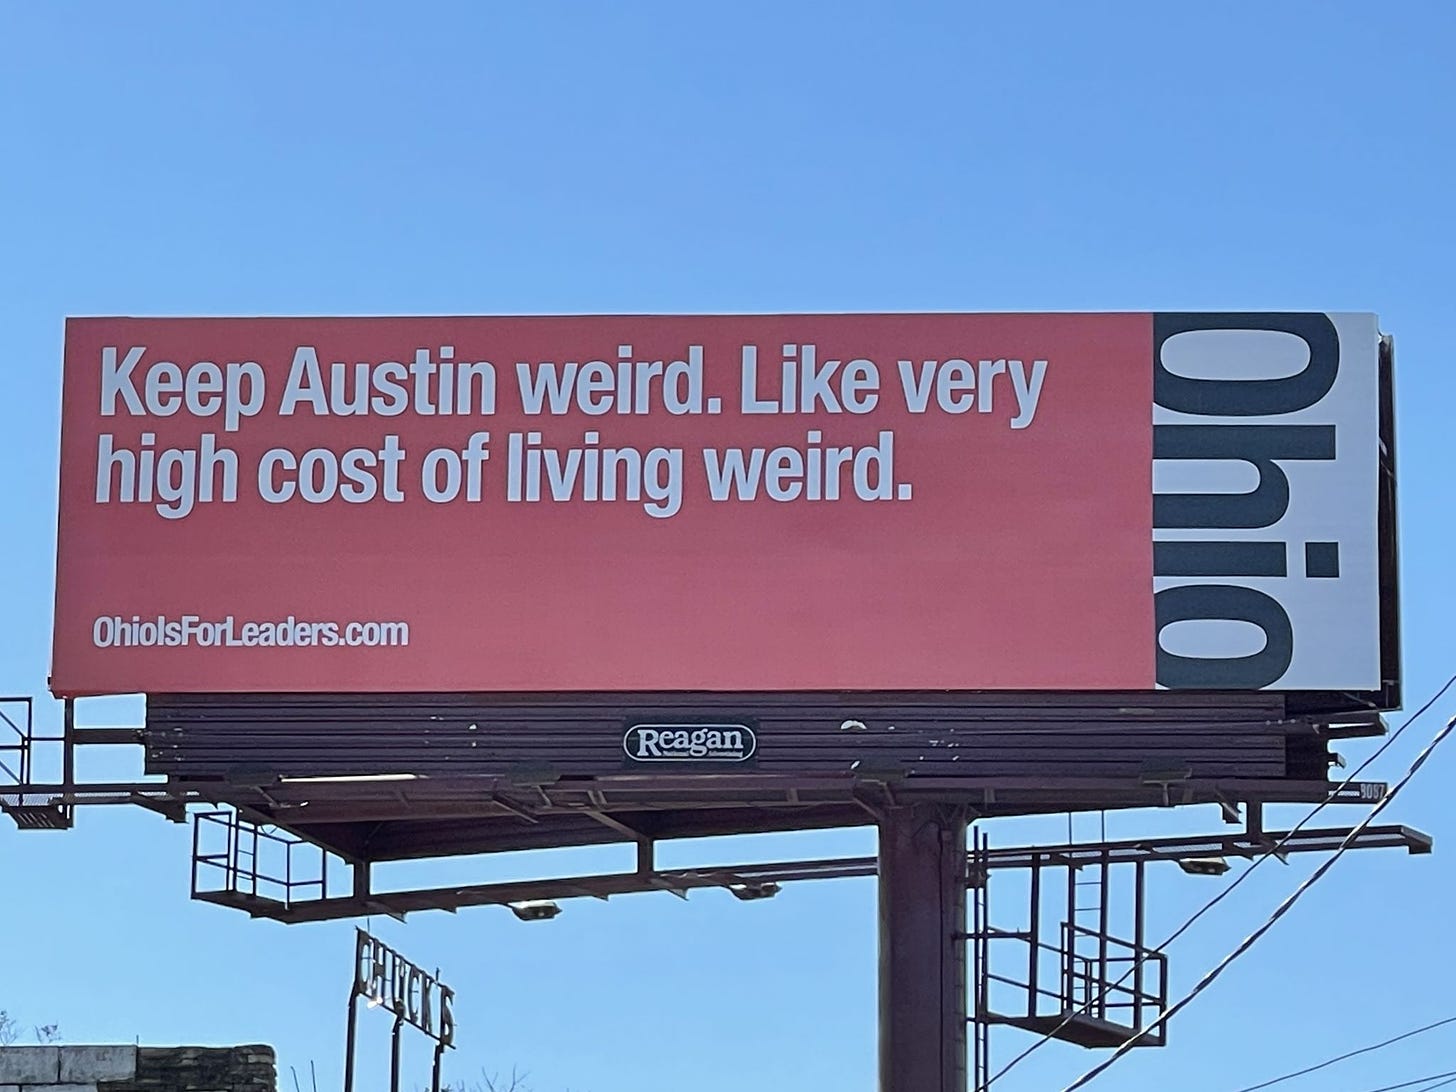 What's the deal with all the Ohio billboards in Austin?